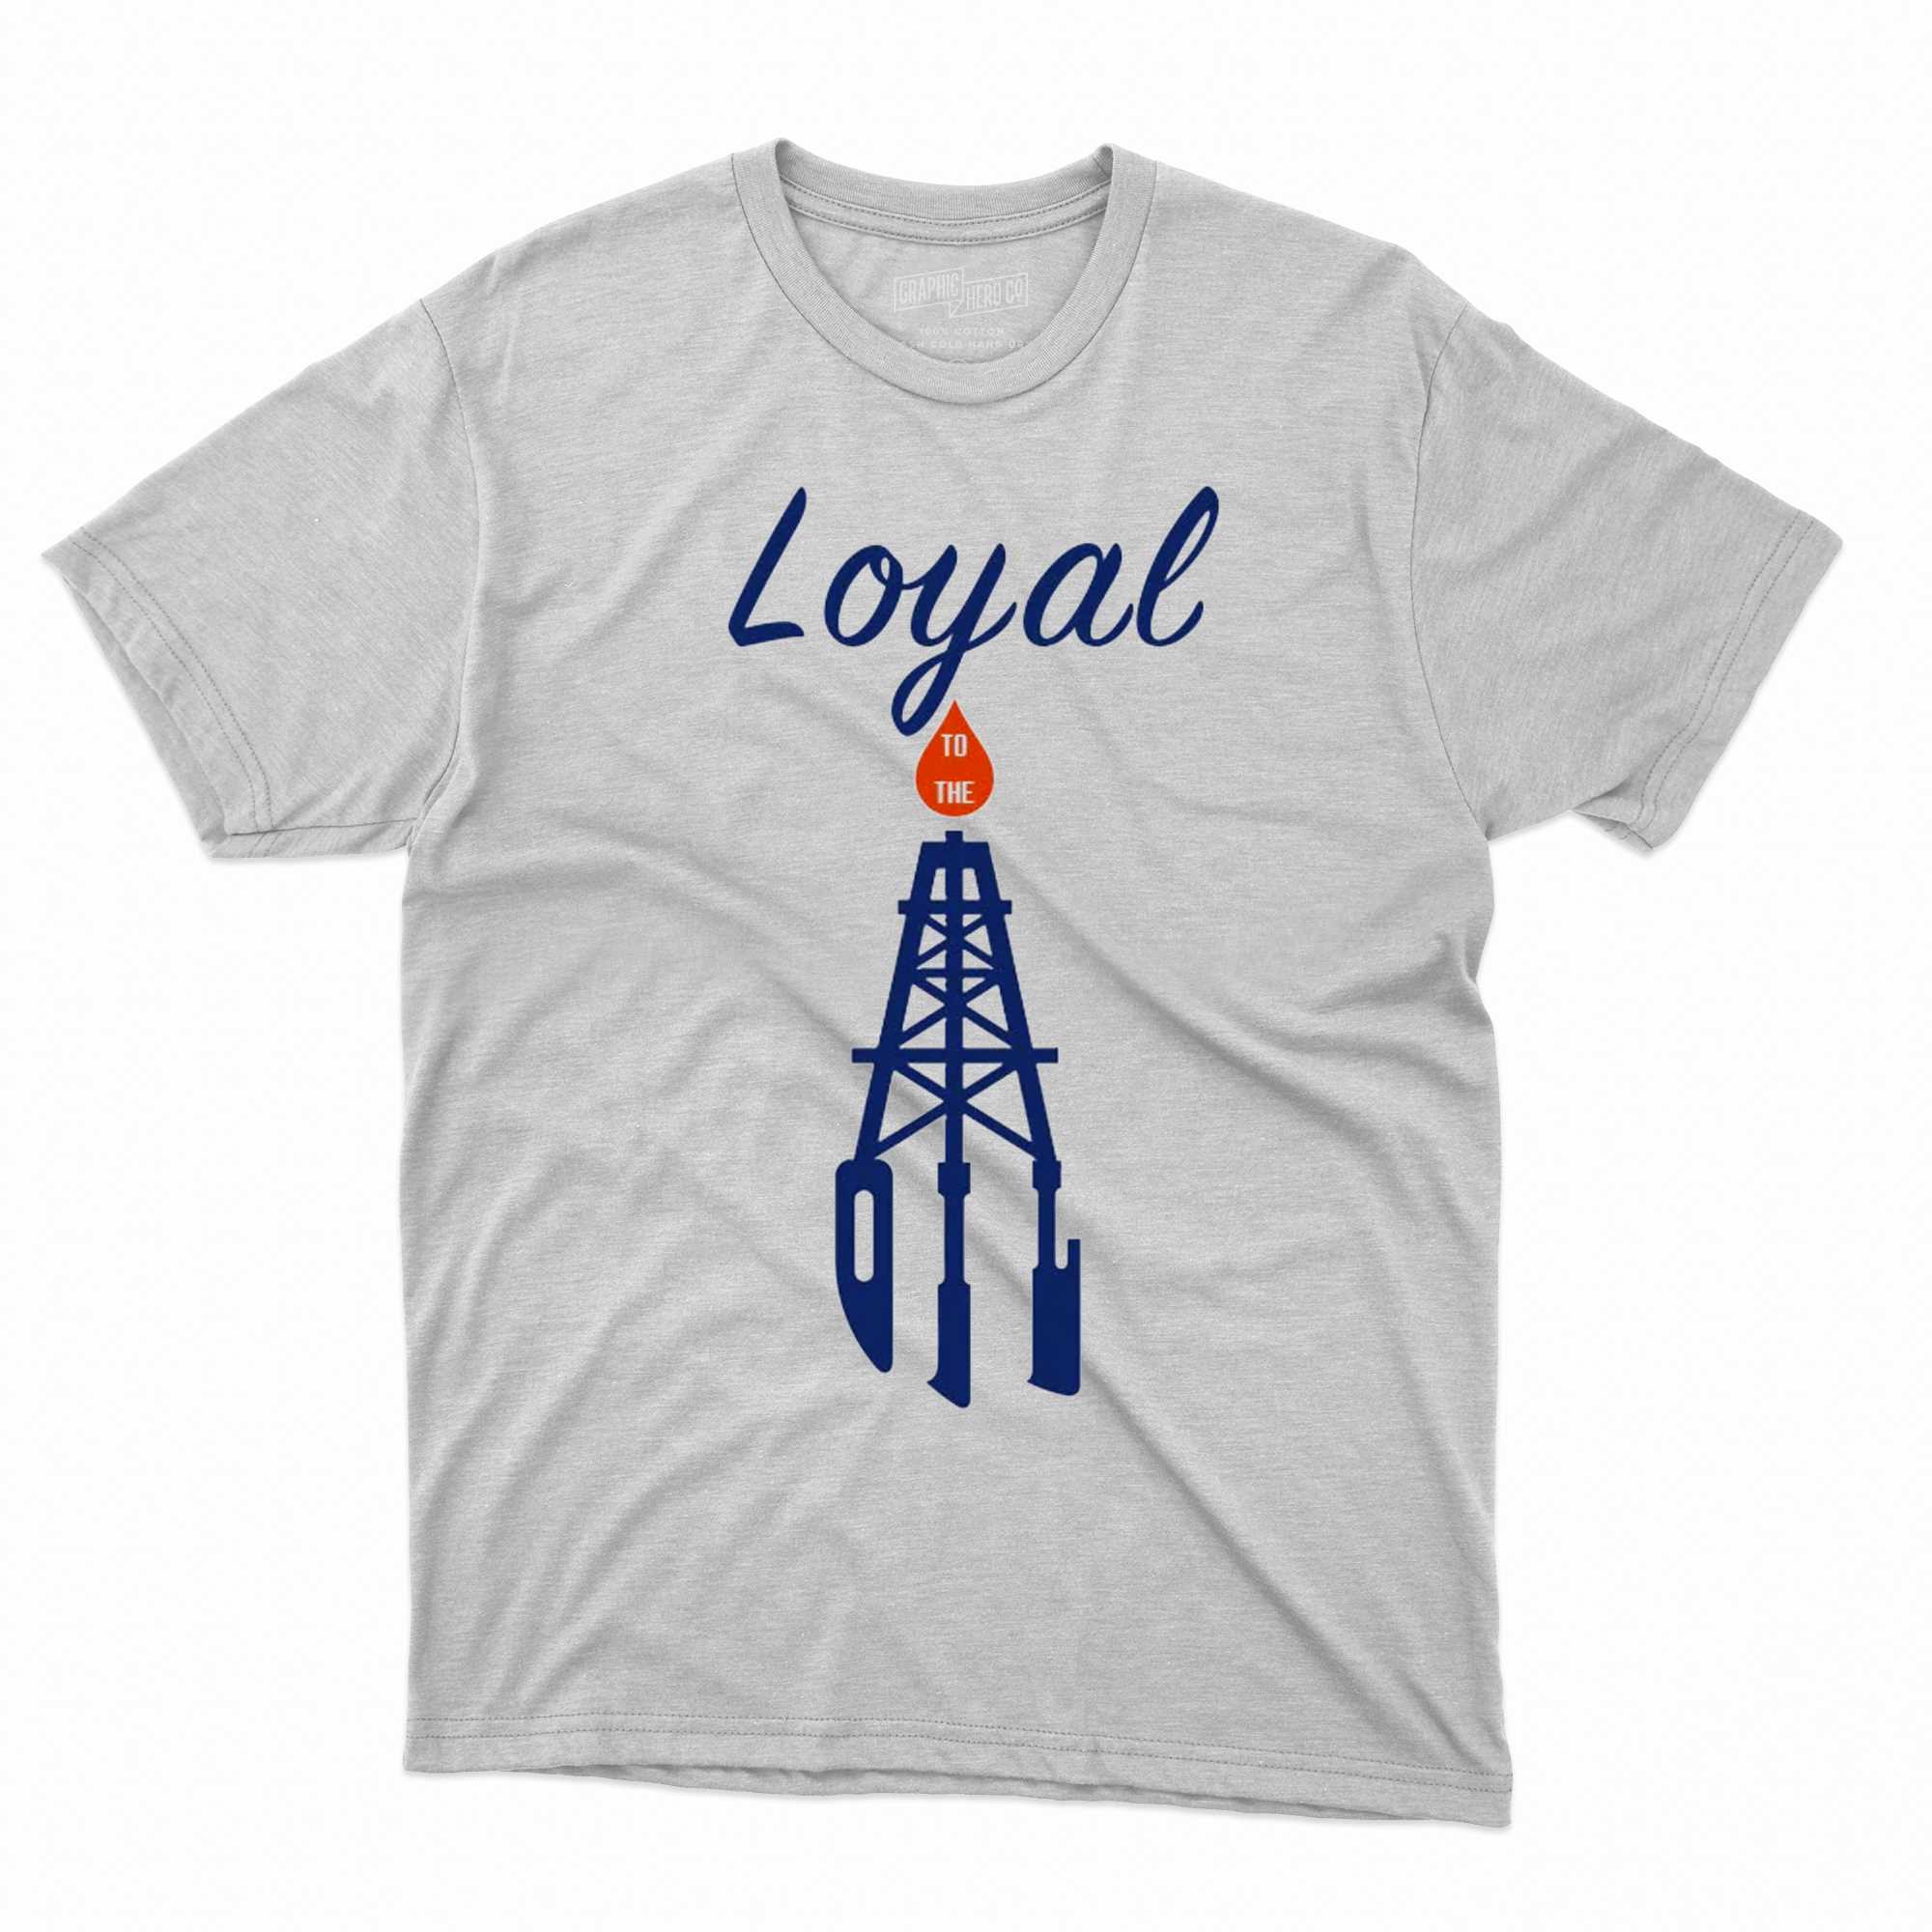 loyal to the oil t shirt 1